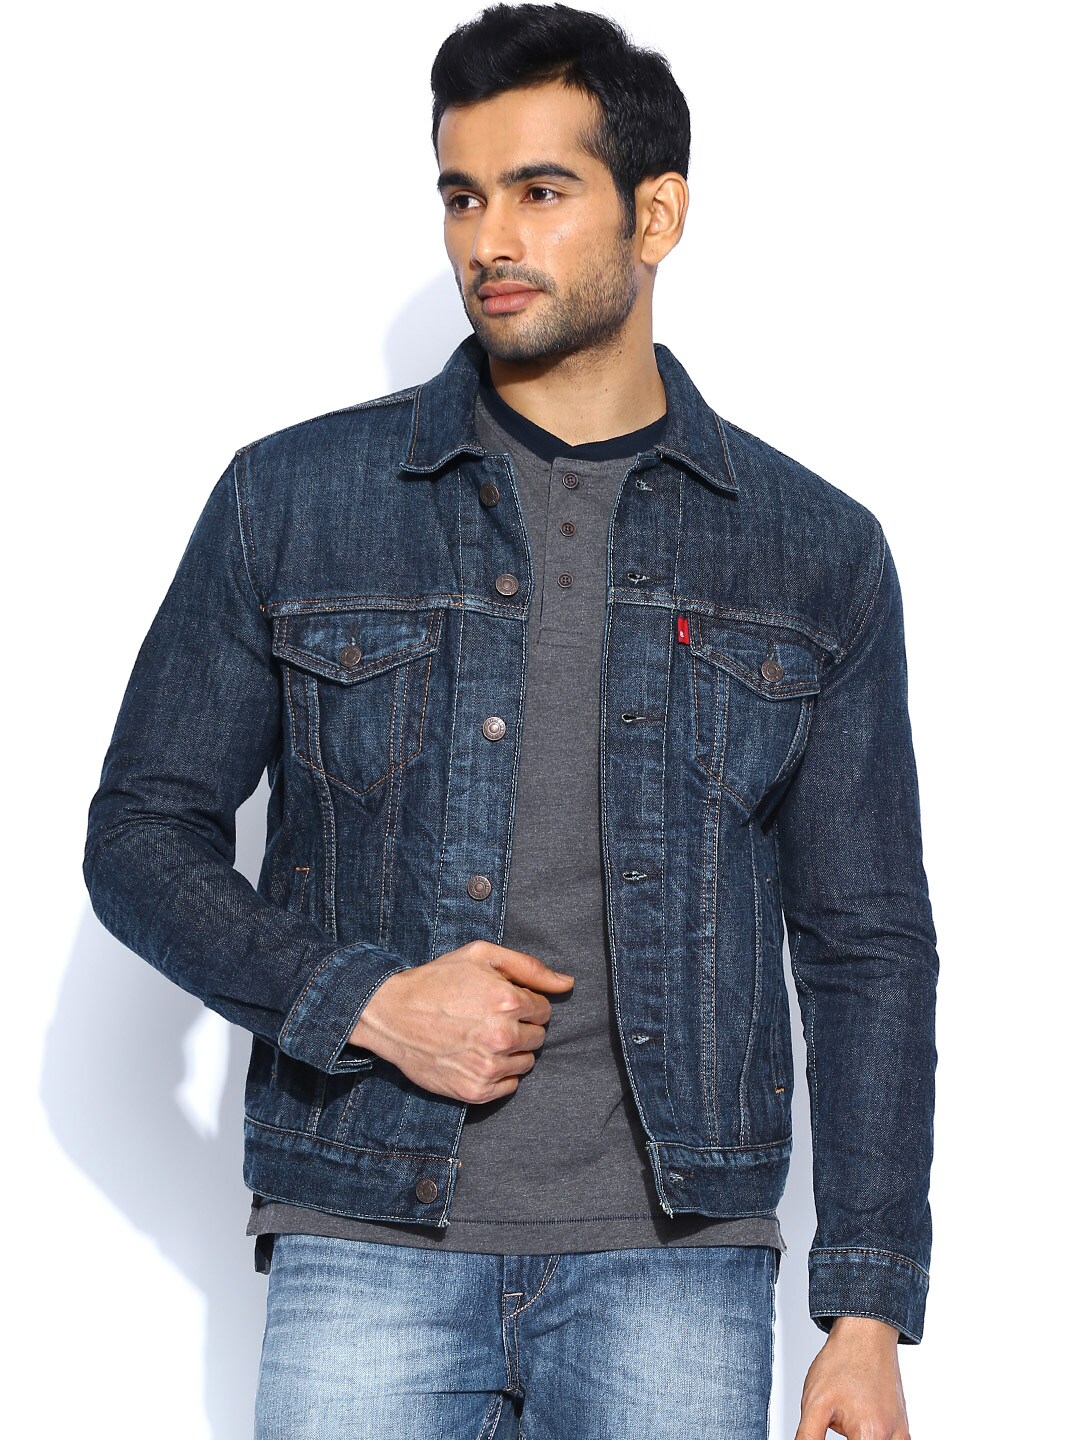 levis jacket price in india